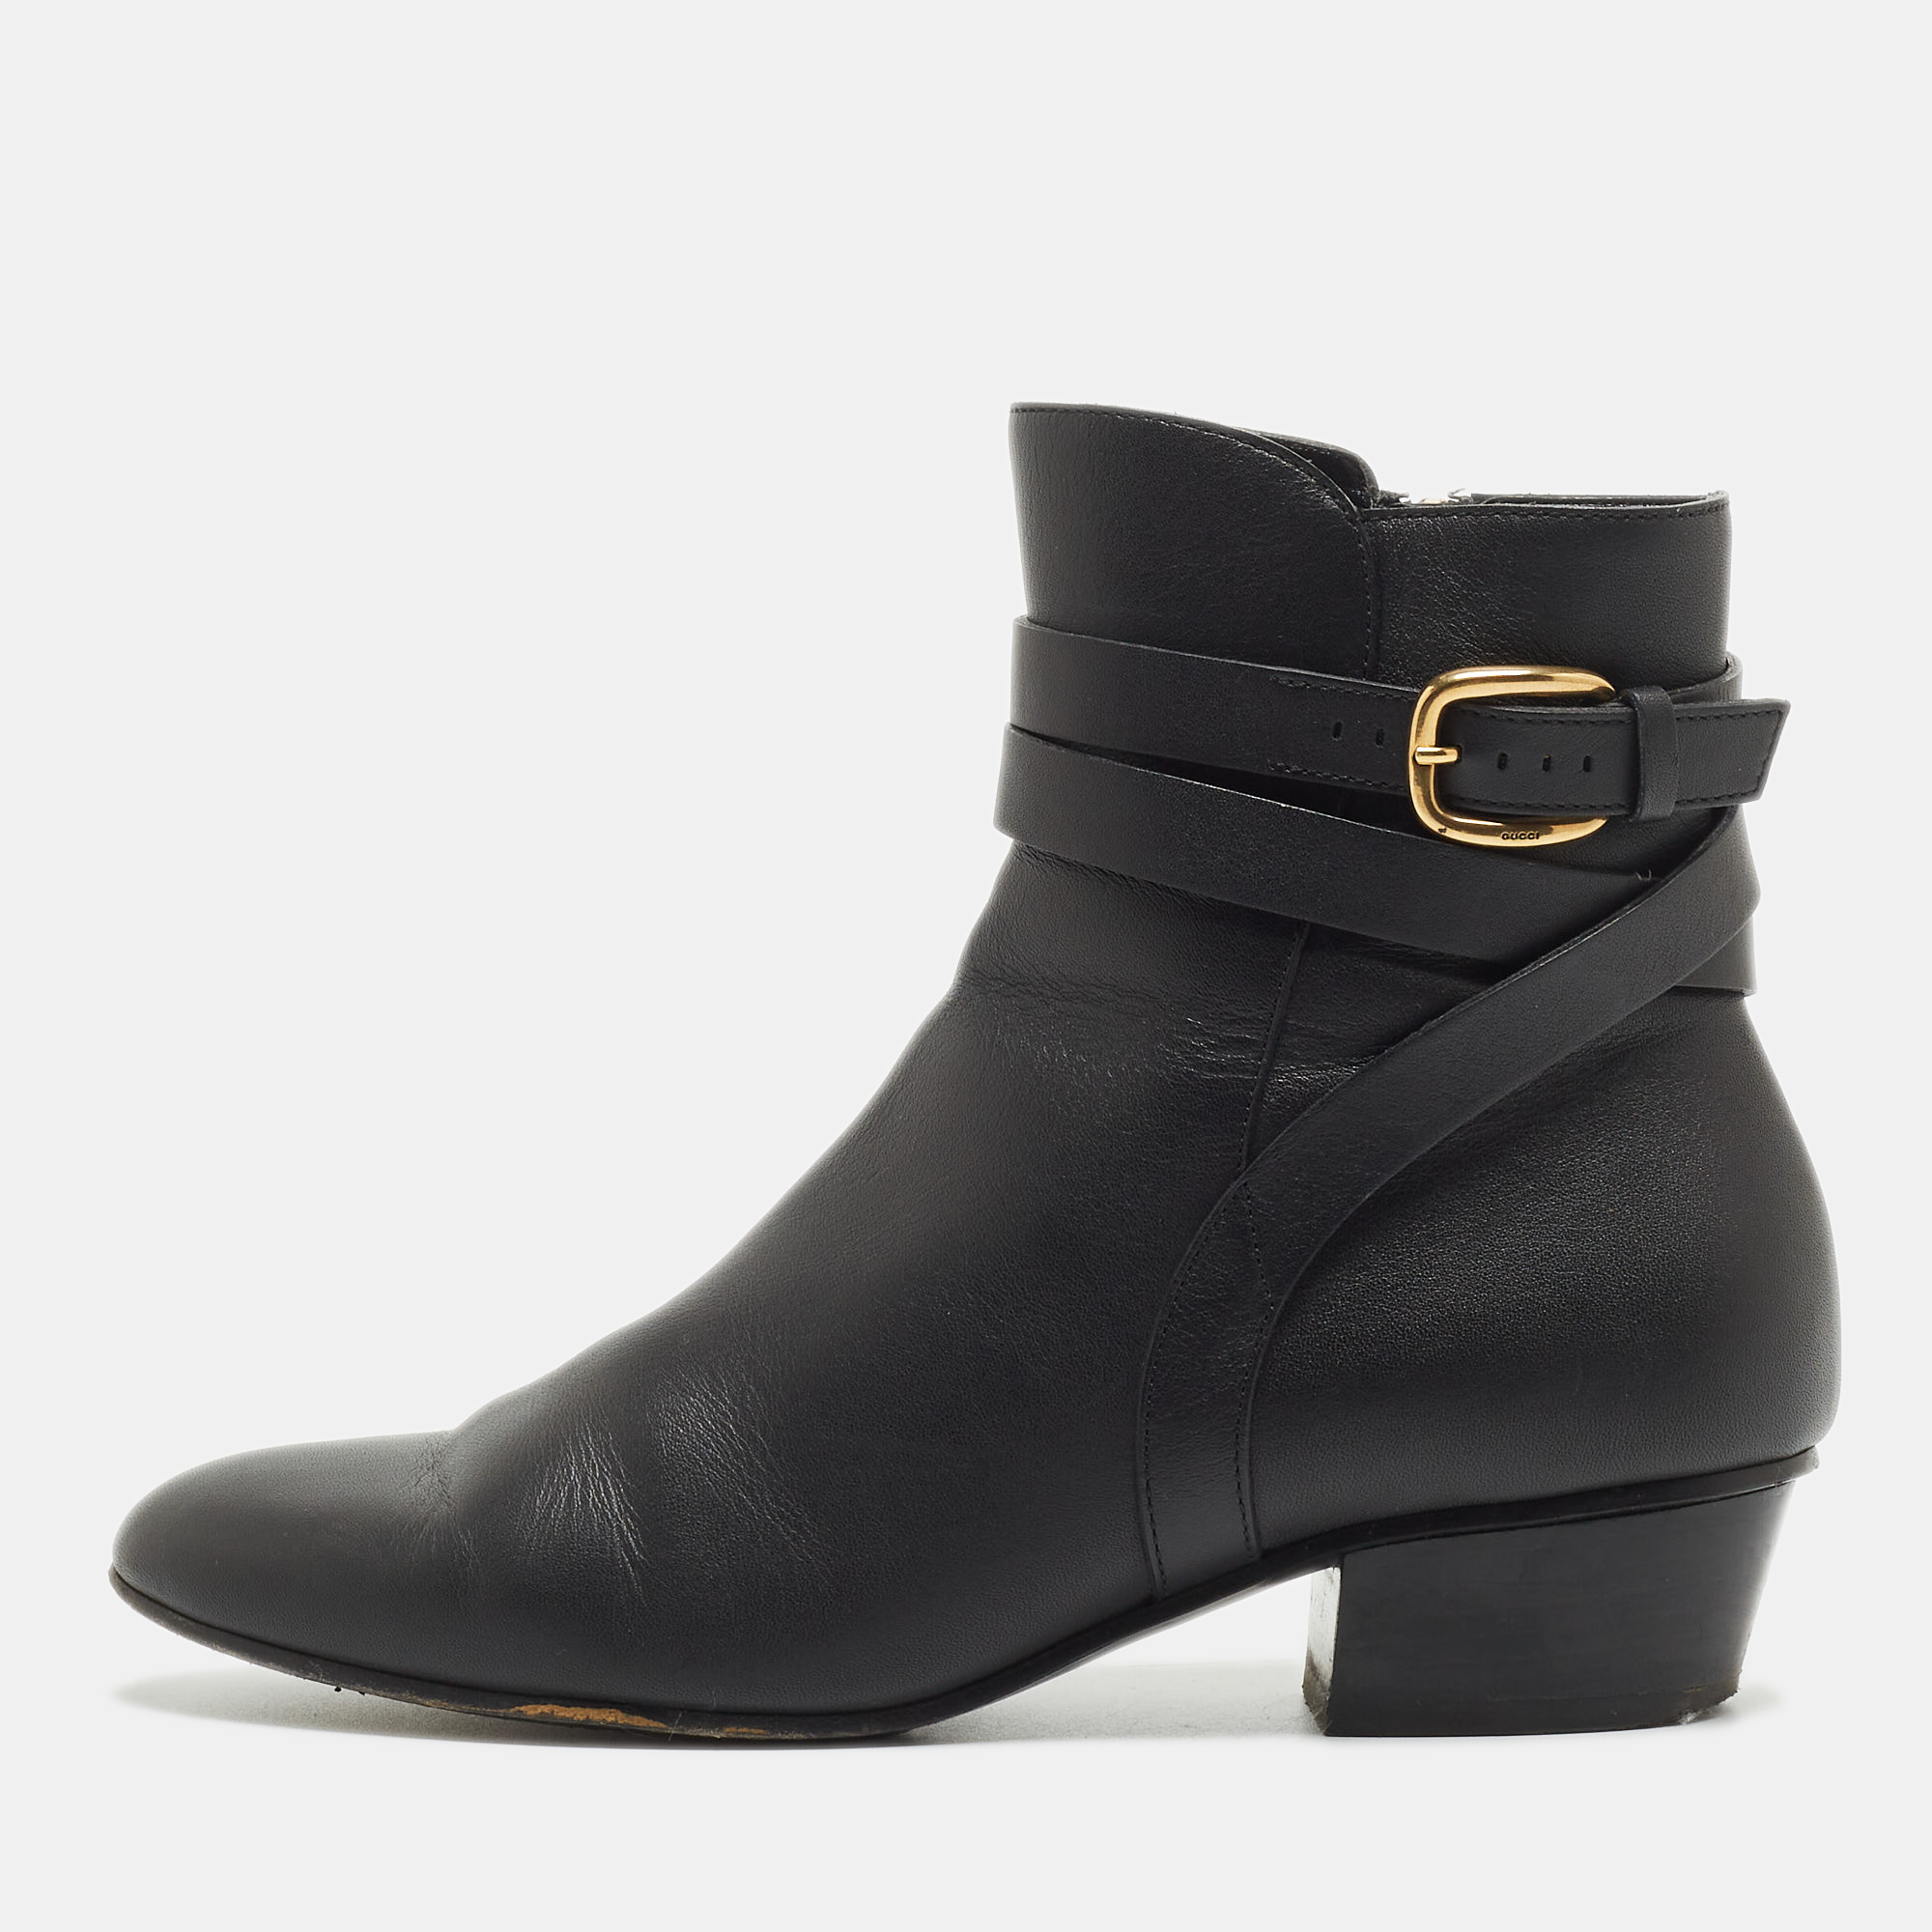 Pre-owned Gucci Black Leather Buckle Detail Ankle Booties Size 36.5